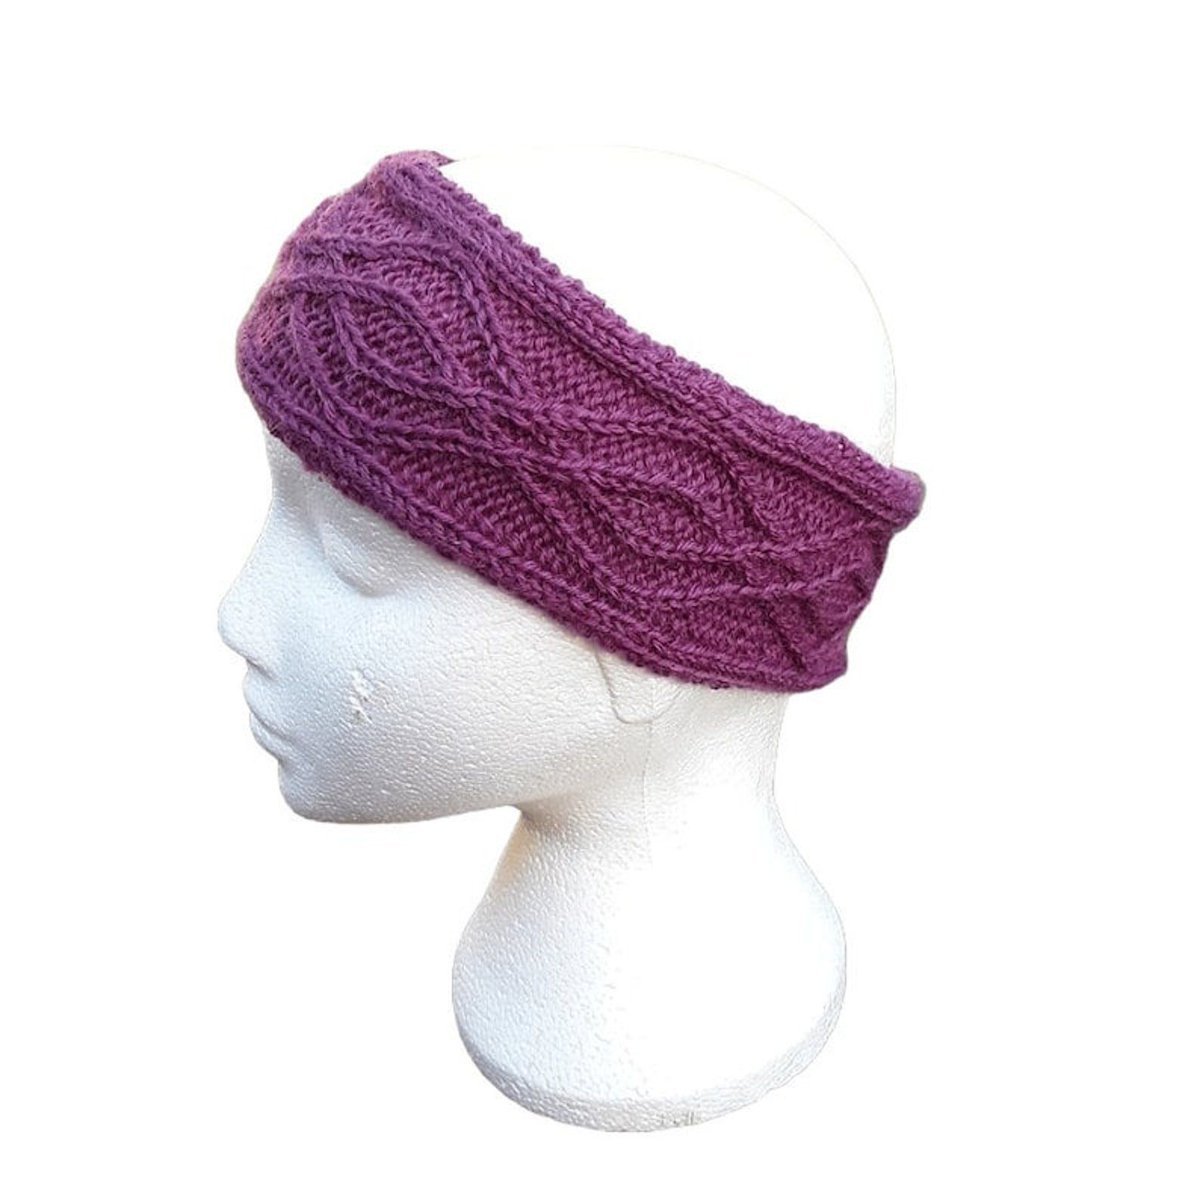 Embrace the chill in style with our hand-knitted magenta pink headband. Its diamond cable pattern adds a unique charm, perfect for ladies and girls alike. Shop now on #Etsy! #handmade #knittingtopia #craftbizparty #MHHSBD knittingtopia.etsy.com/listing/167996…